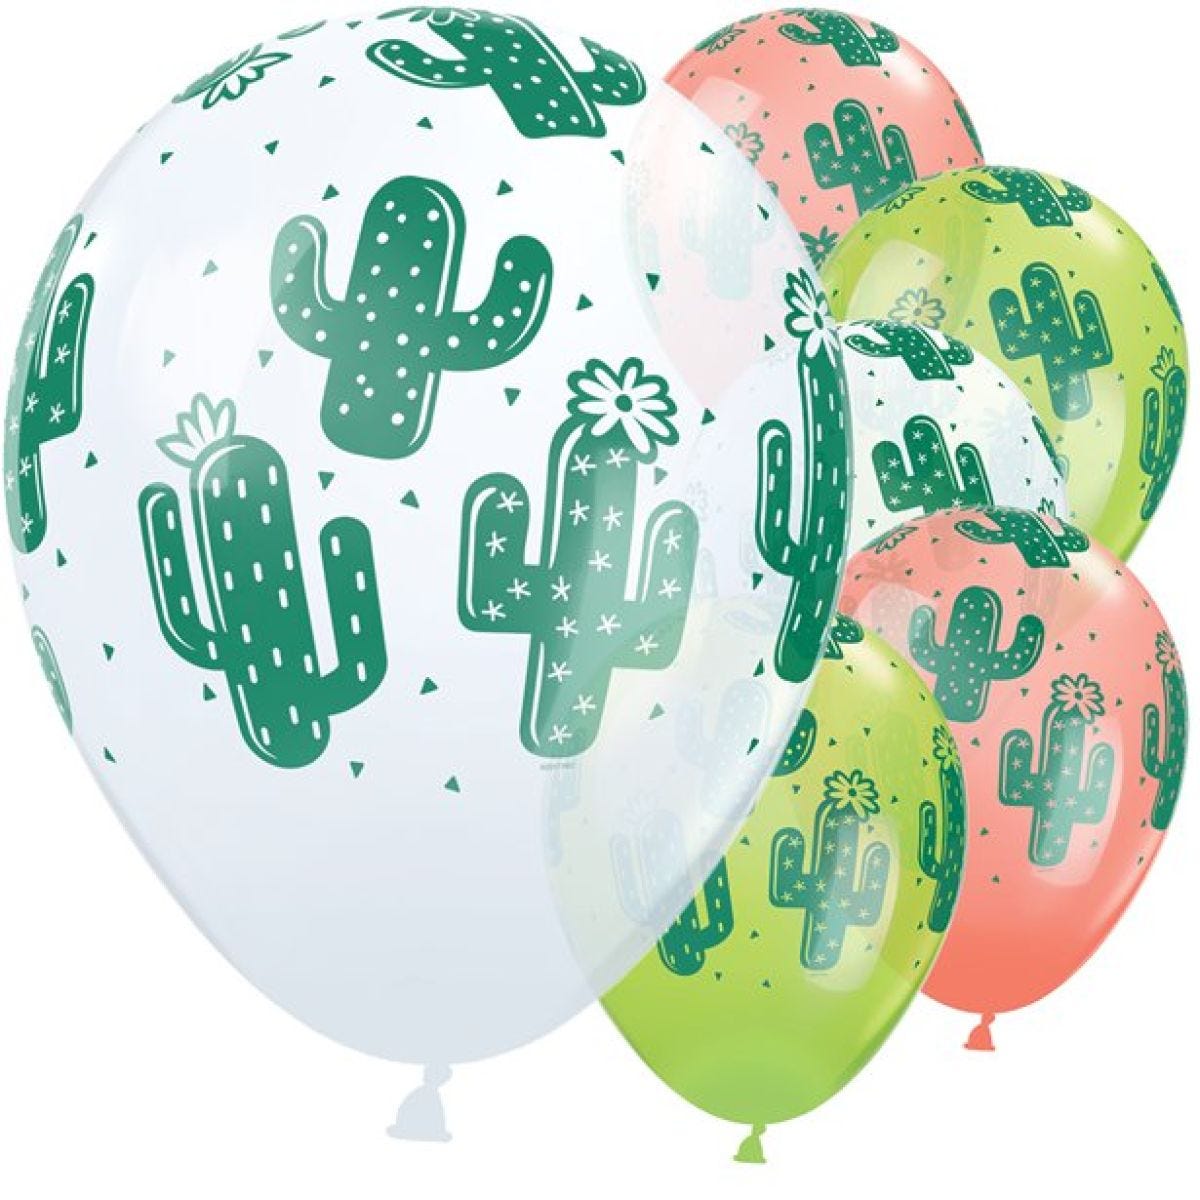 Cactus Balloons - White, Coral & Lime Green - 11" Latex (25pk)